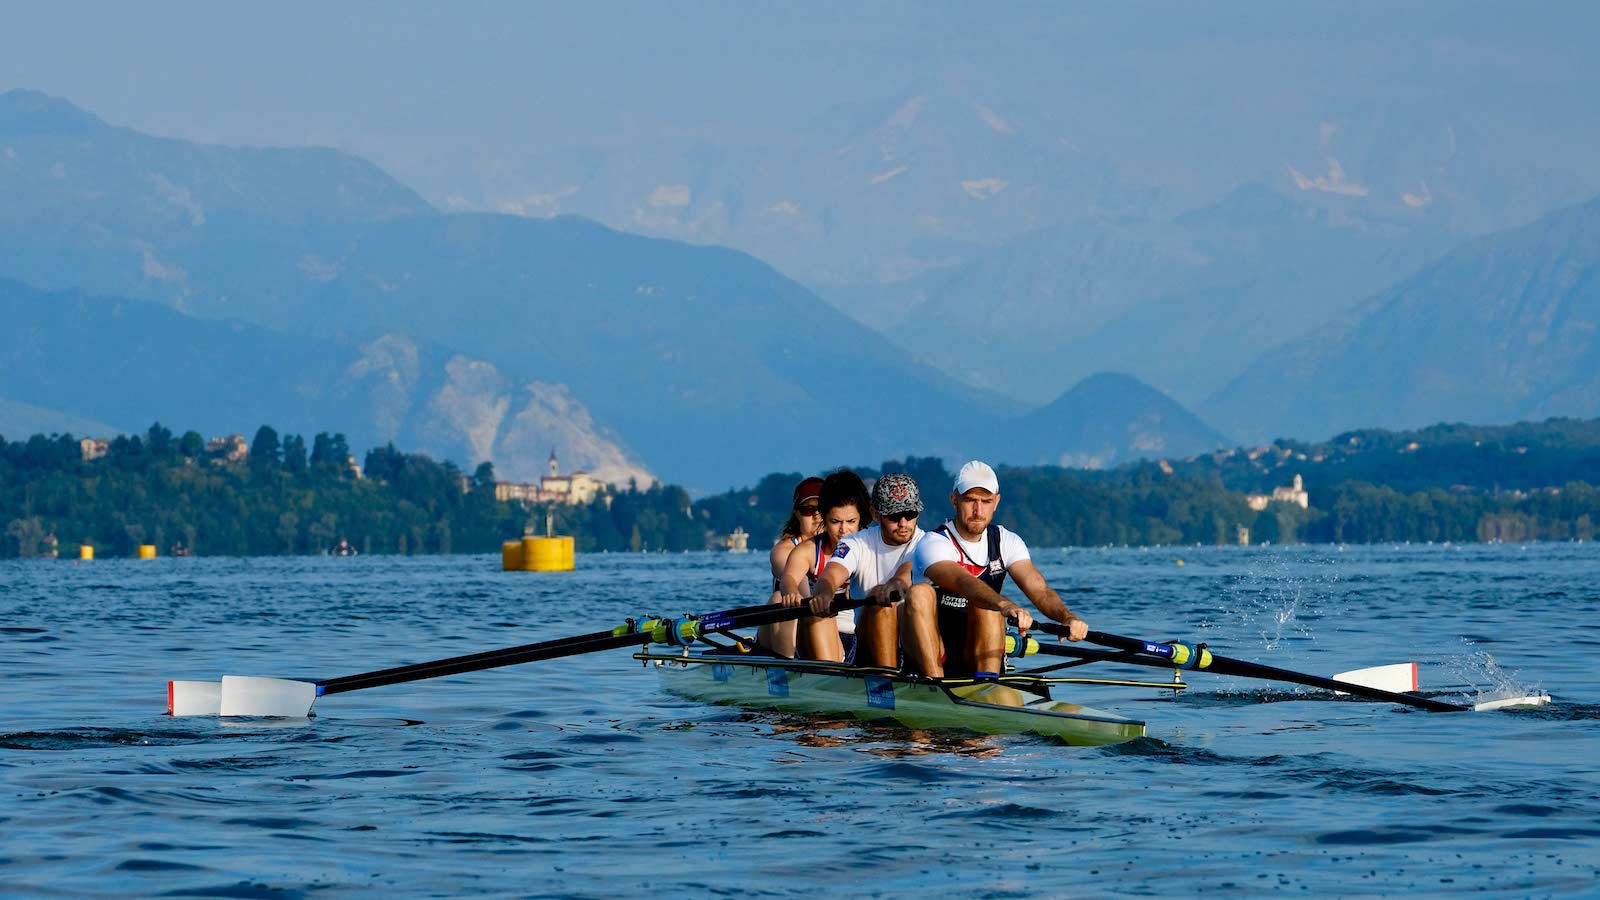 Varese will host qualifying for the Tokyo 2020 Olympics and Paralympics in April ©British Rowing